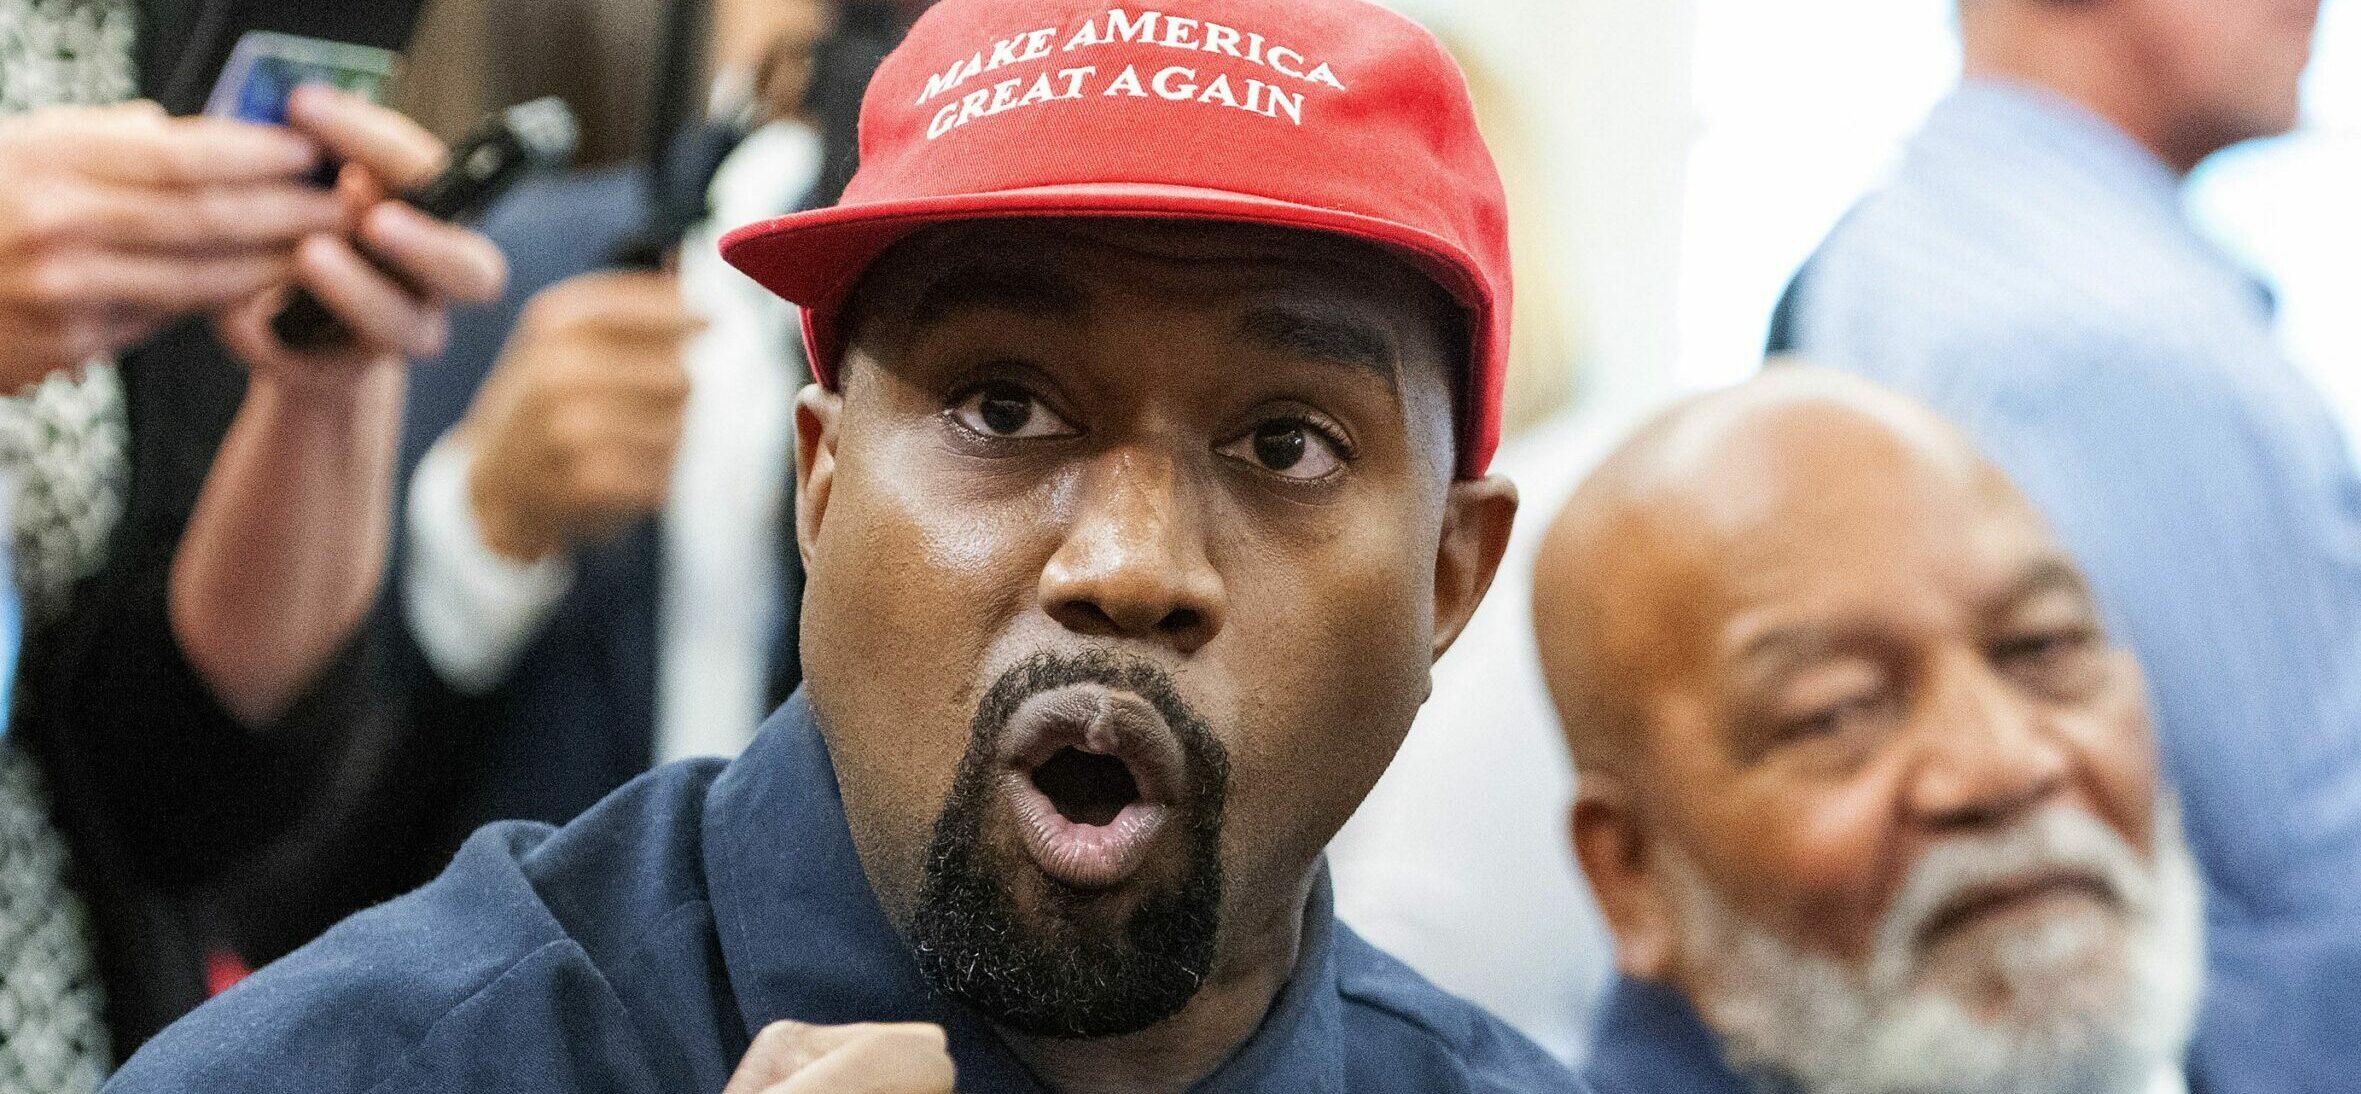 Kanye West Told Tucker Carlson He Was ‘Threatened’ Over Trump Support